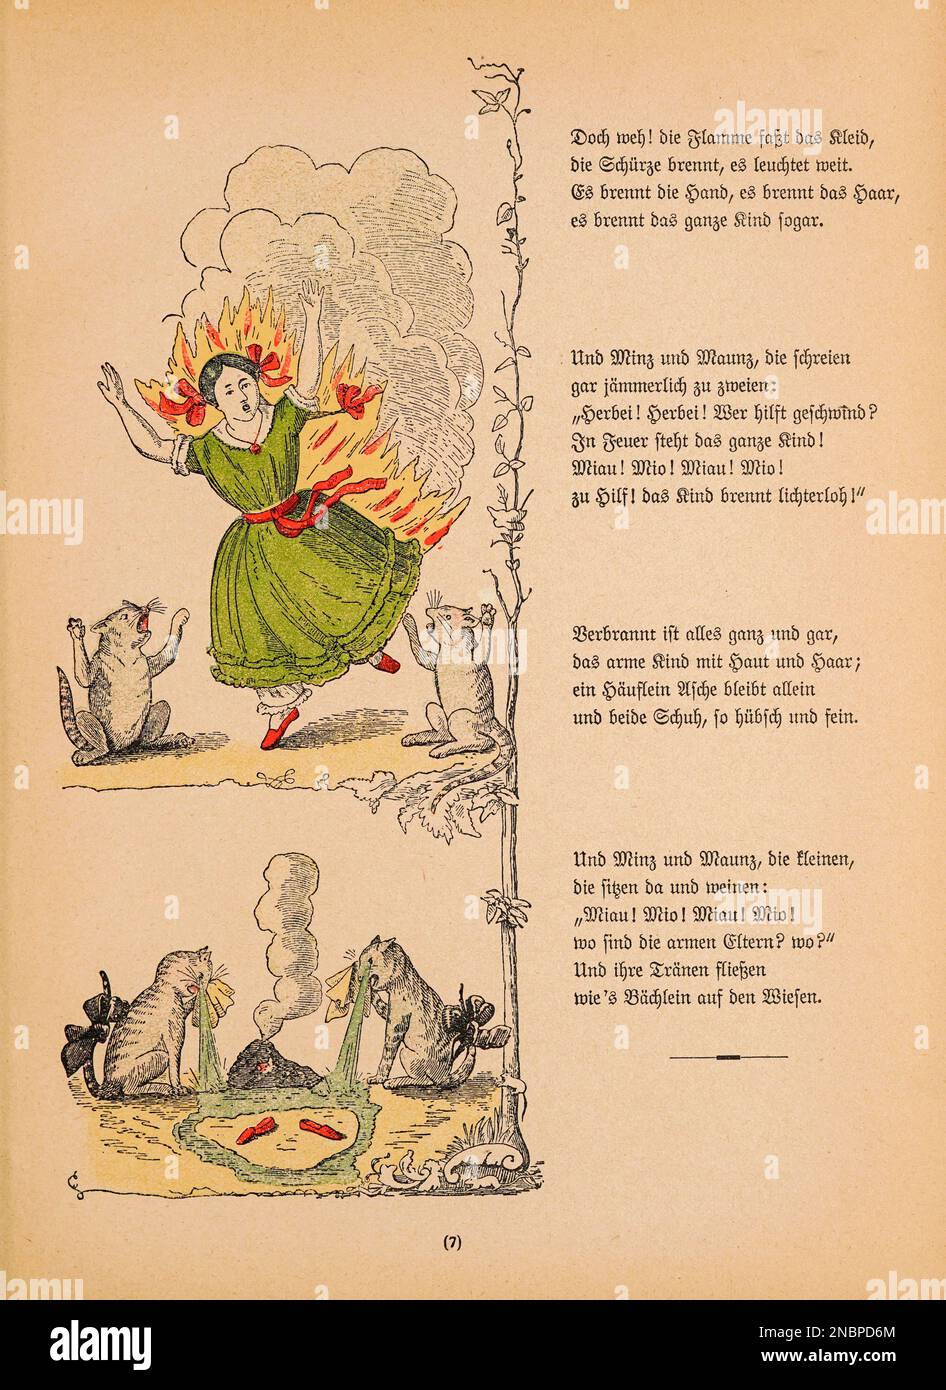 Die gar traurige Geschichte mit dem Feuerzeug - The really sad story with the lighter from the original German Version of the book ' Das Struwwelpeter-album : aus Bilderbüchern ' by Hoffmann, Heinrich, 1809-1894 Publication date 1900 Publisher Frankfurt am Main : Rütten & Loening [ Der Struwwelpeter ('shock-headed Peter' or 'Shaggy Peter') is an 1845 German children's book by Heinrich Hoffmann. It comprises ten illustrated and rhymed stories, mostly about children. Each has a clear moral that demonstrates the disastrous consequences of misbehavior in an exaggerated way.[1] The title of the fir Stock Photo